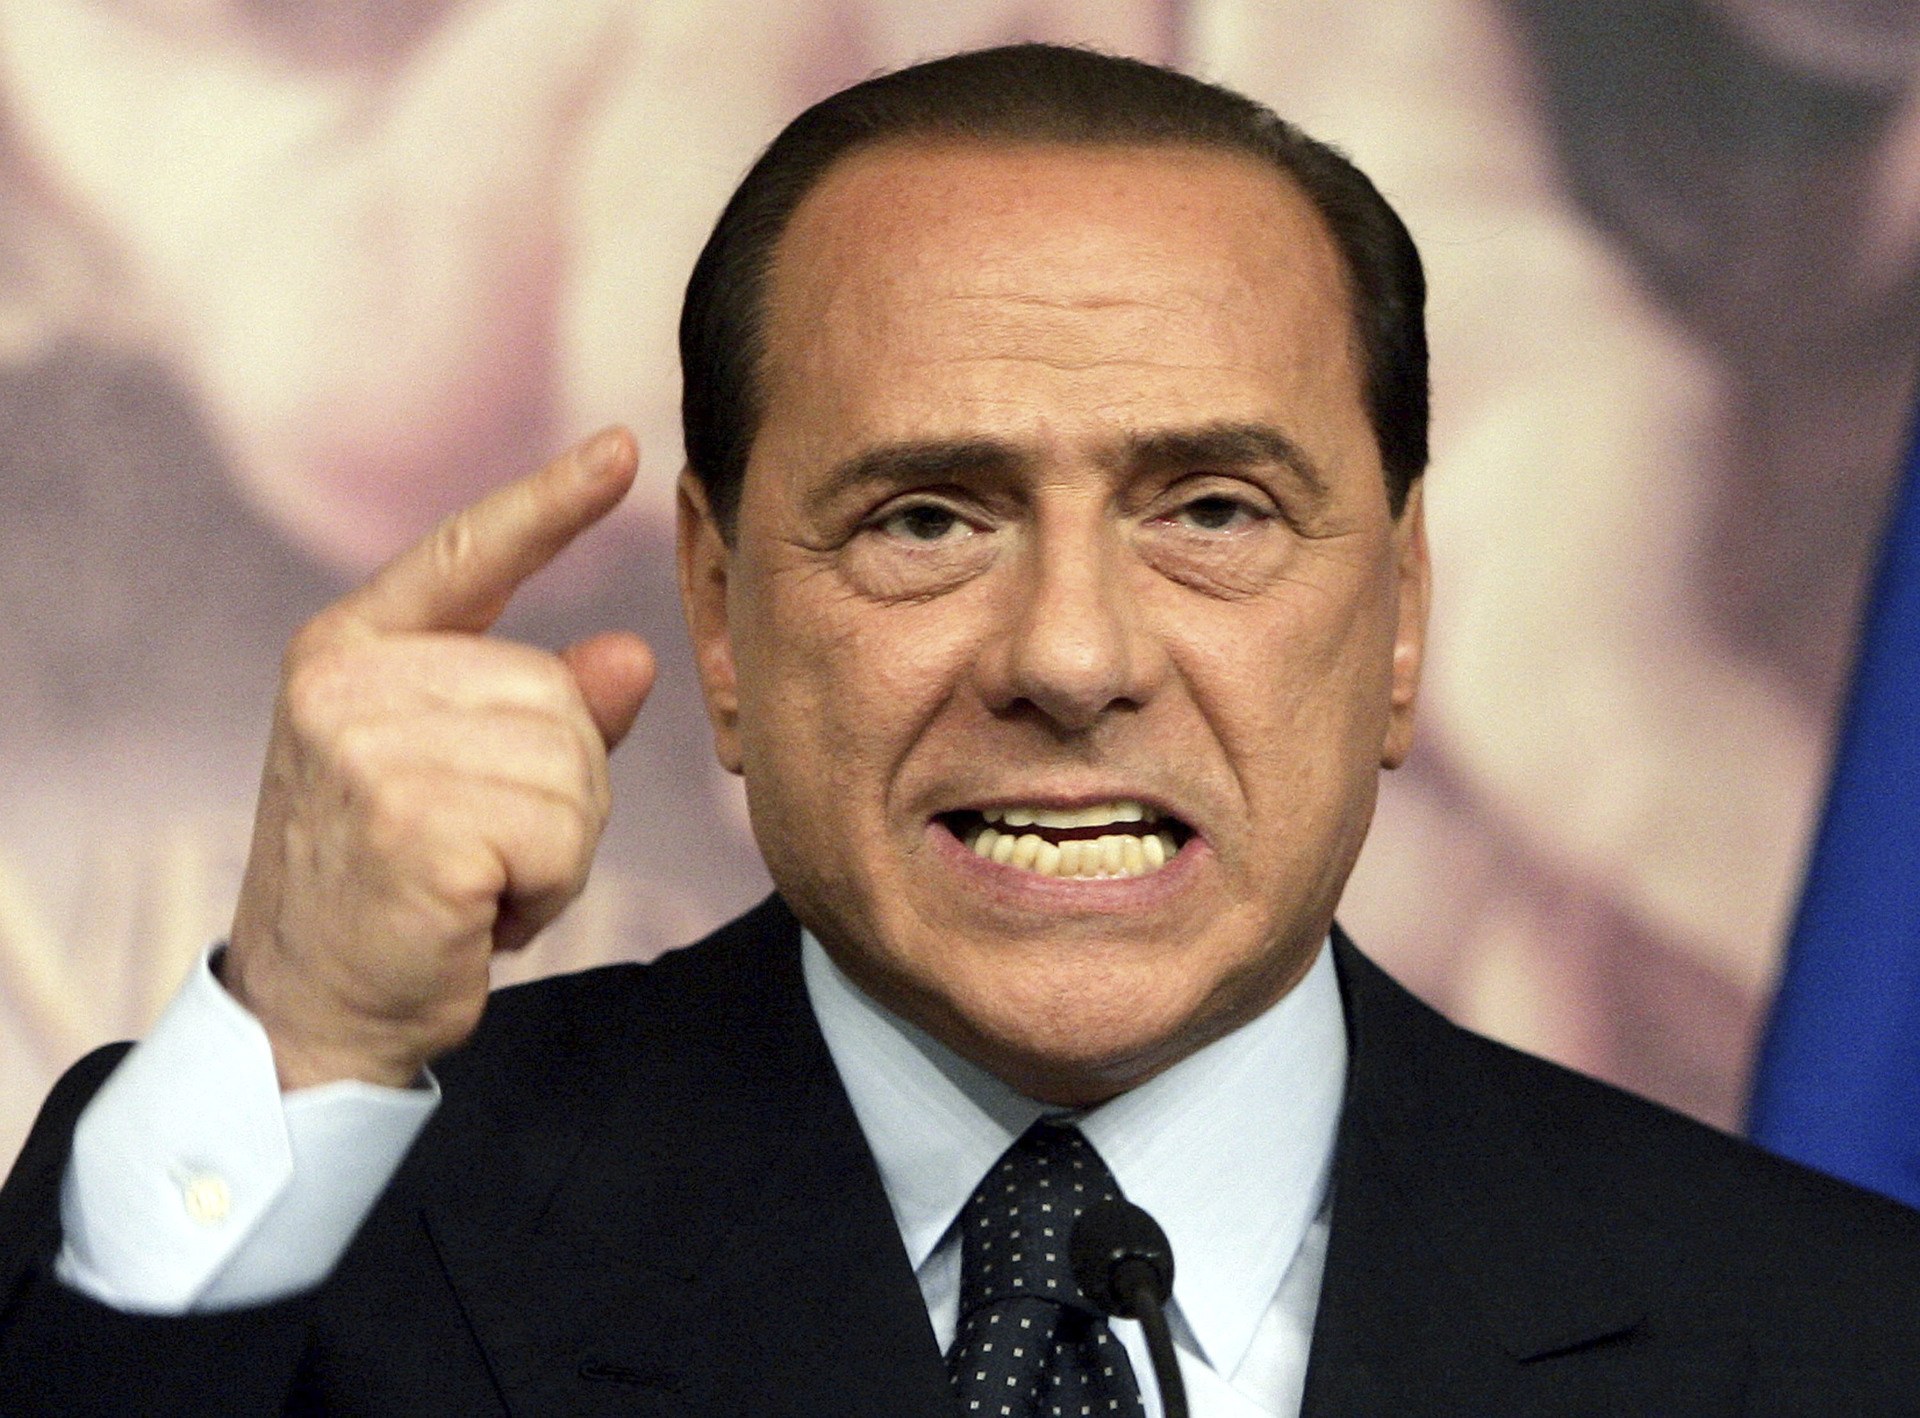 Silvio Berlusconi was Italy’s longest-serving premier despite scandals over his sex-fuelled parties and allegations of corruption.